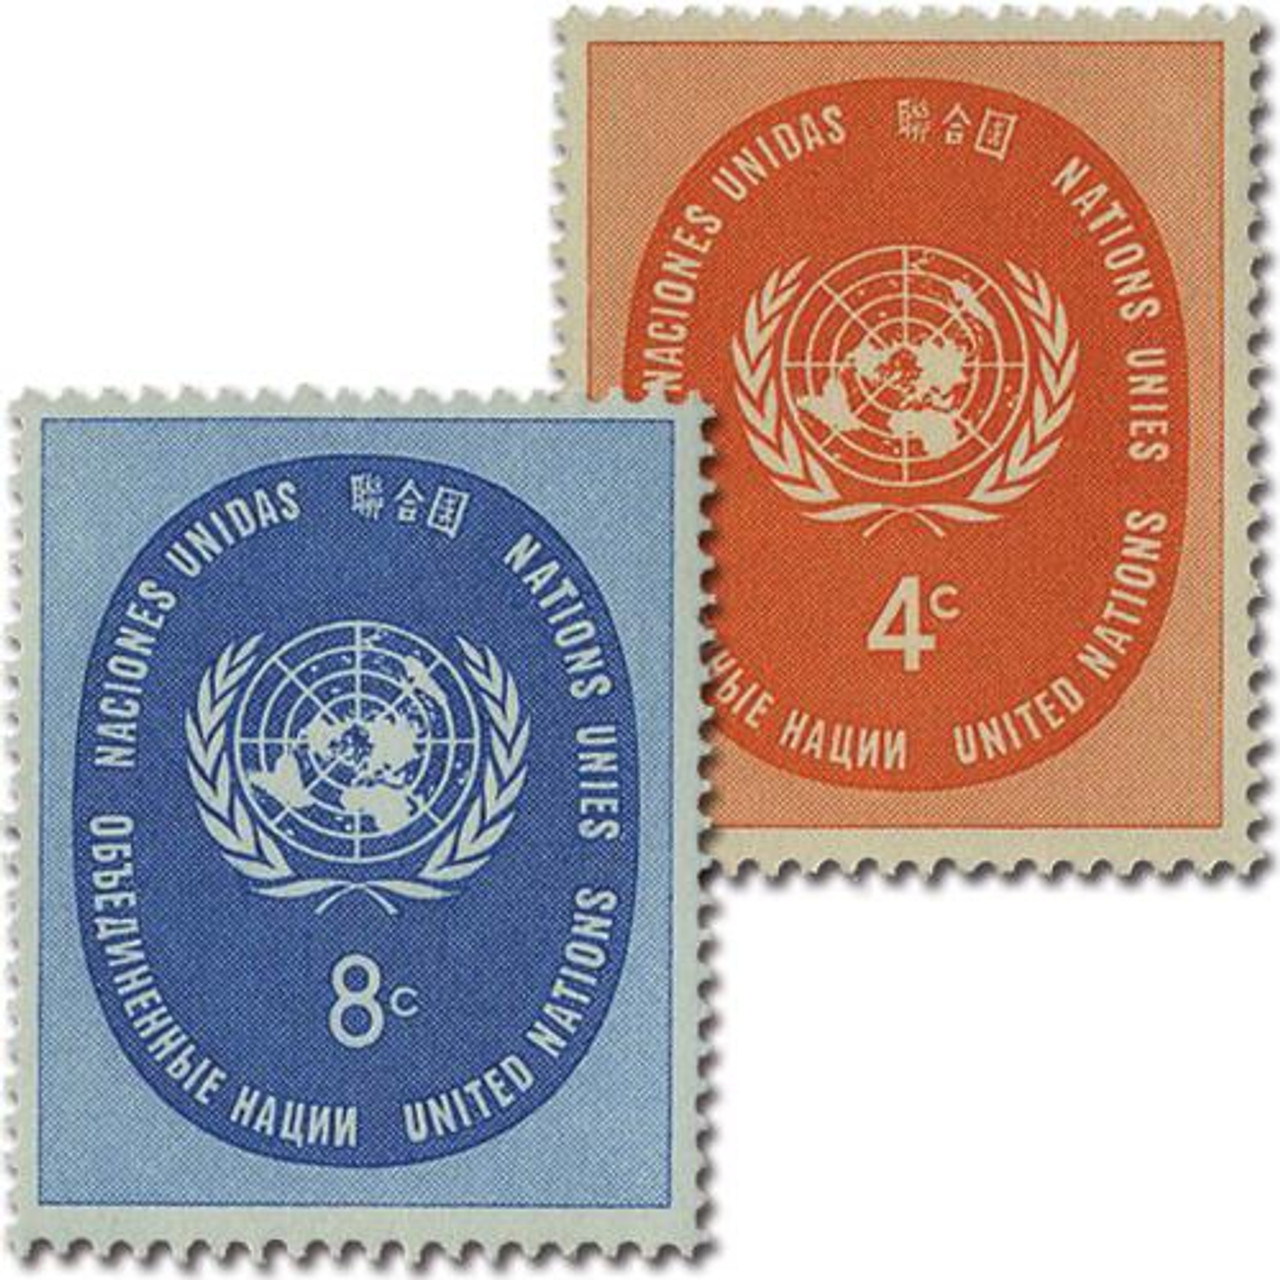 UNYS1958 - 1958 United Nations New York Year Set - Mystic Stamp Company